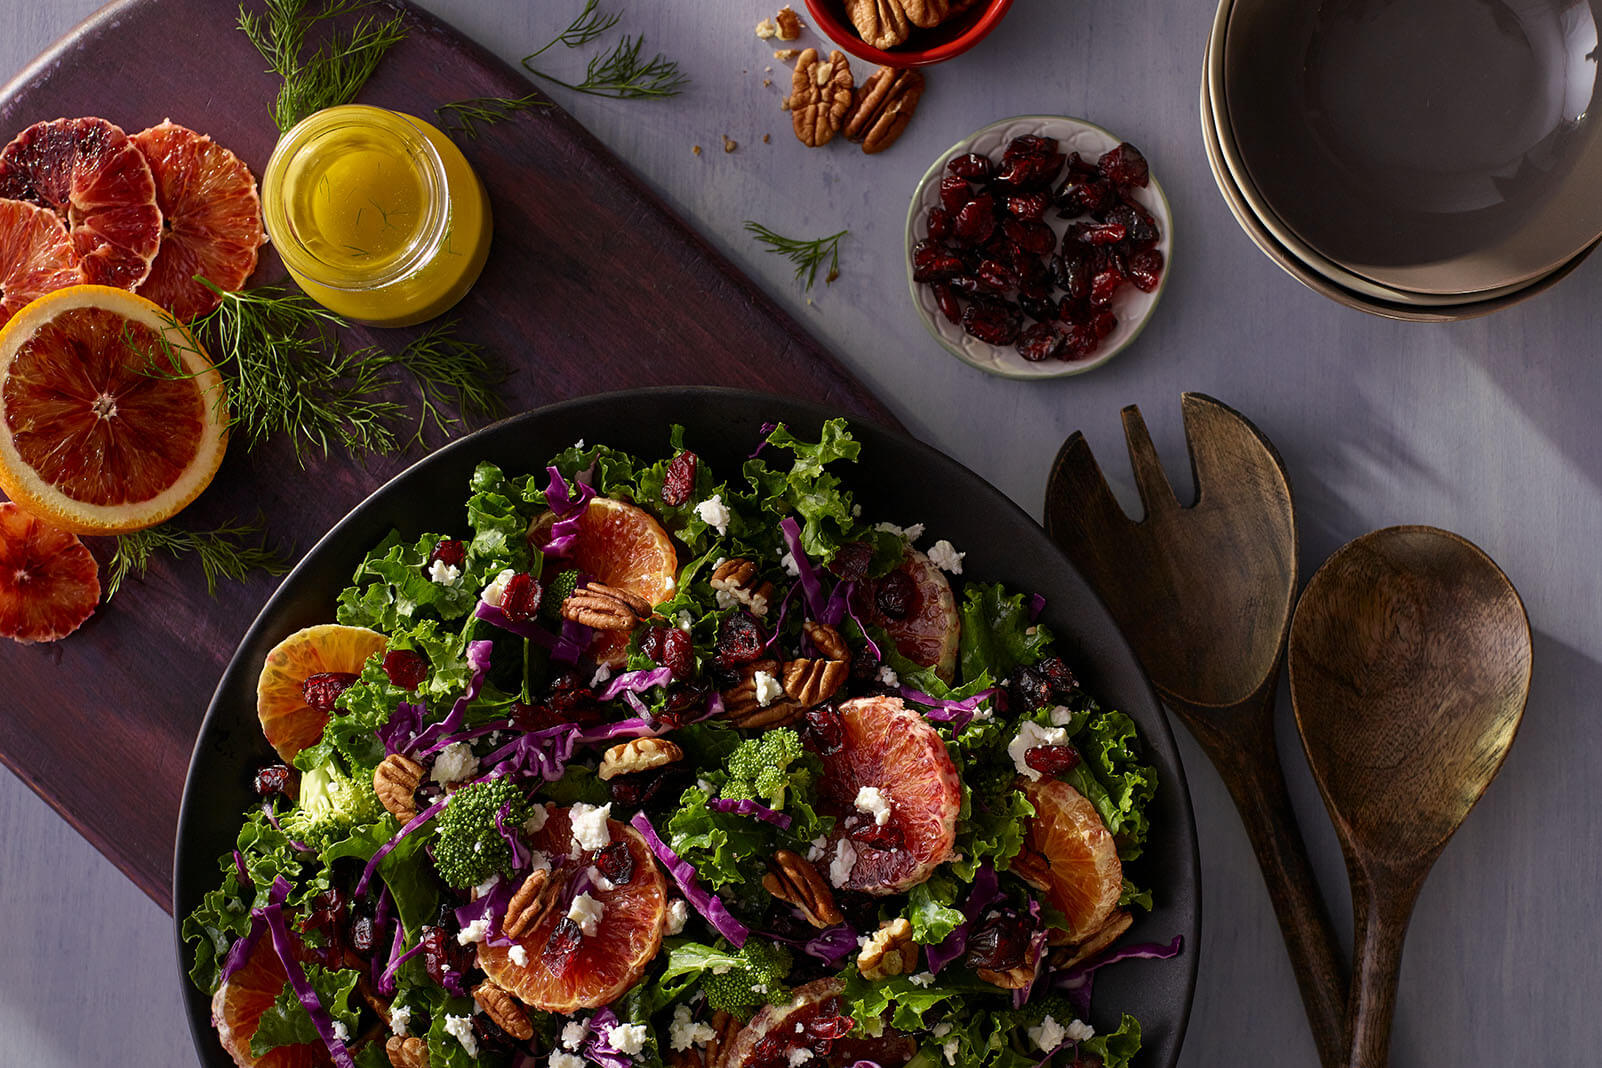 Winter Kale Salad with Blood Orange and Craisins® Dried Cranberries